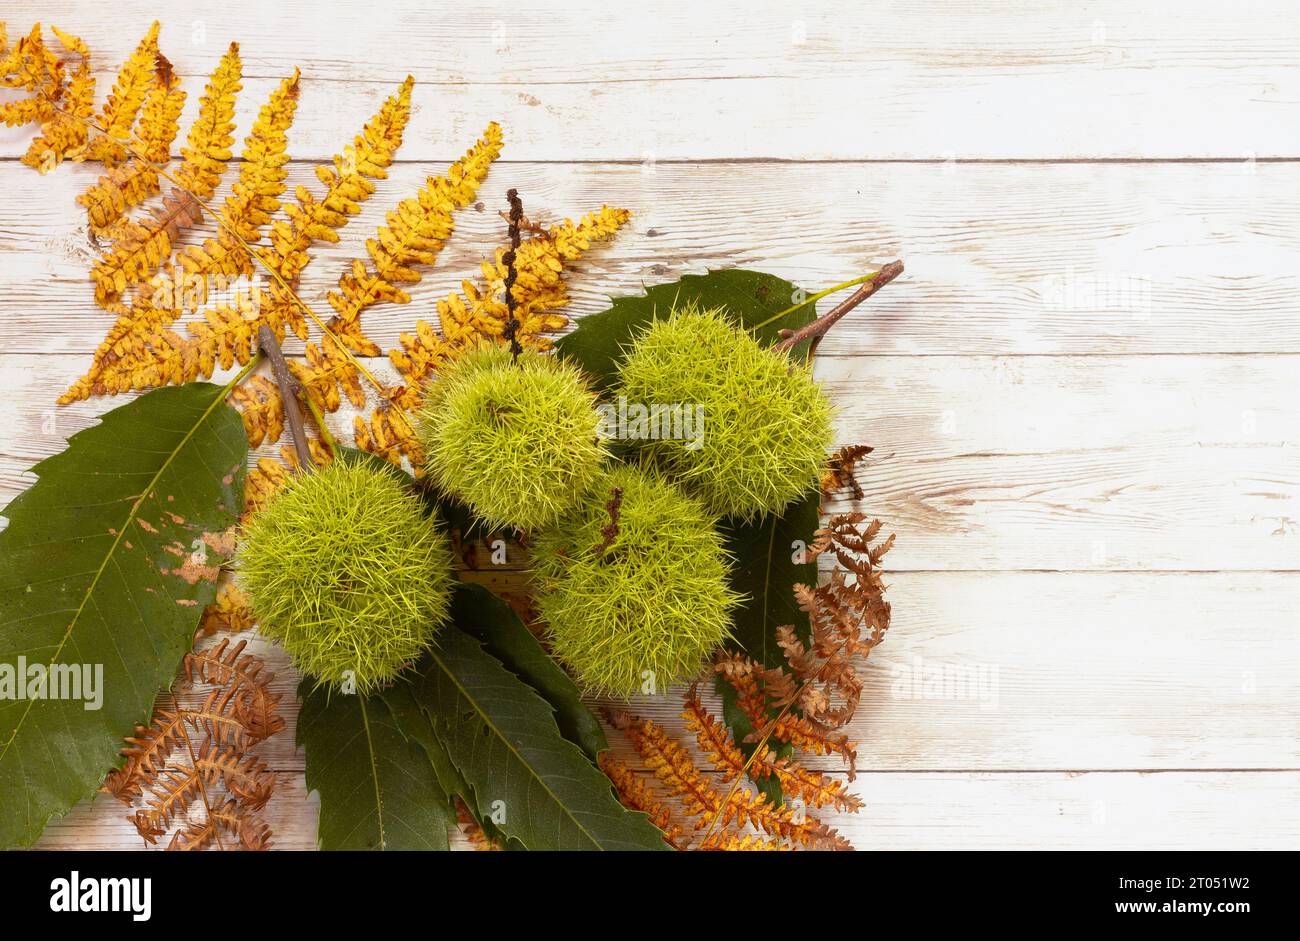 Autumn Nature Themed Flay Lay with Bracken & Chestnuts in Spikey Cases Stock Photo